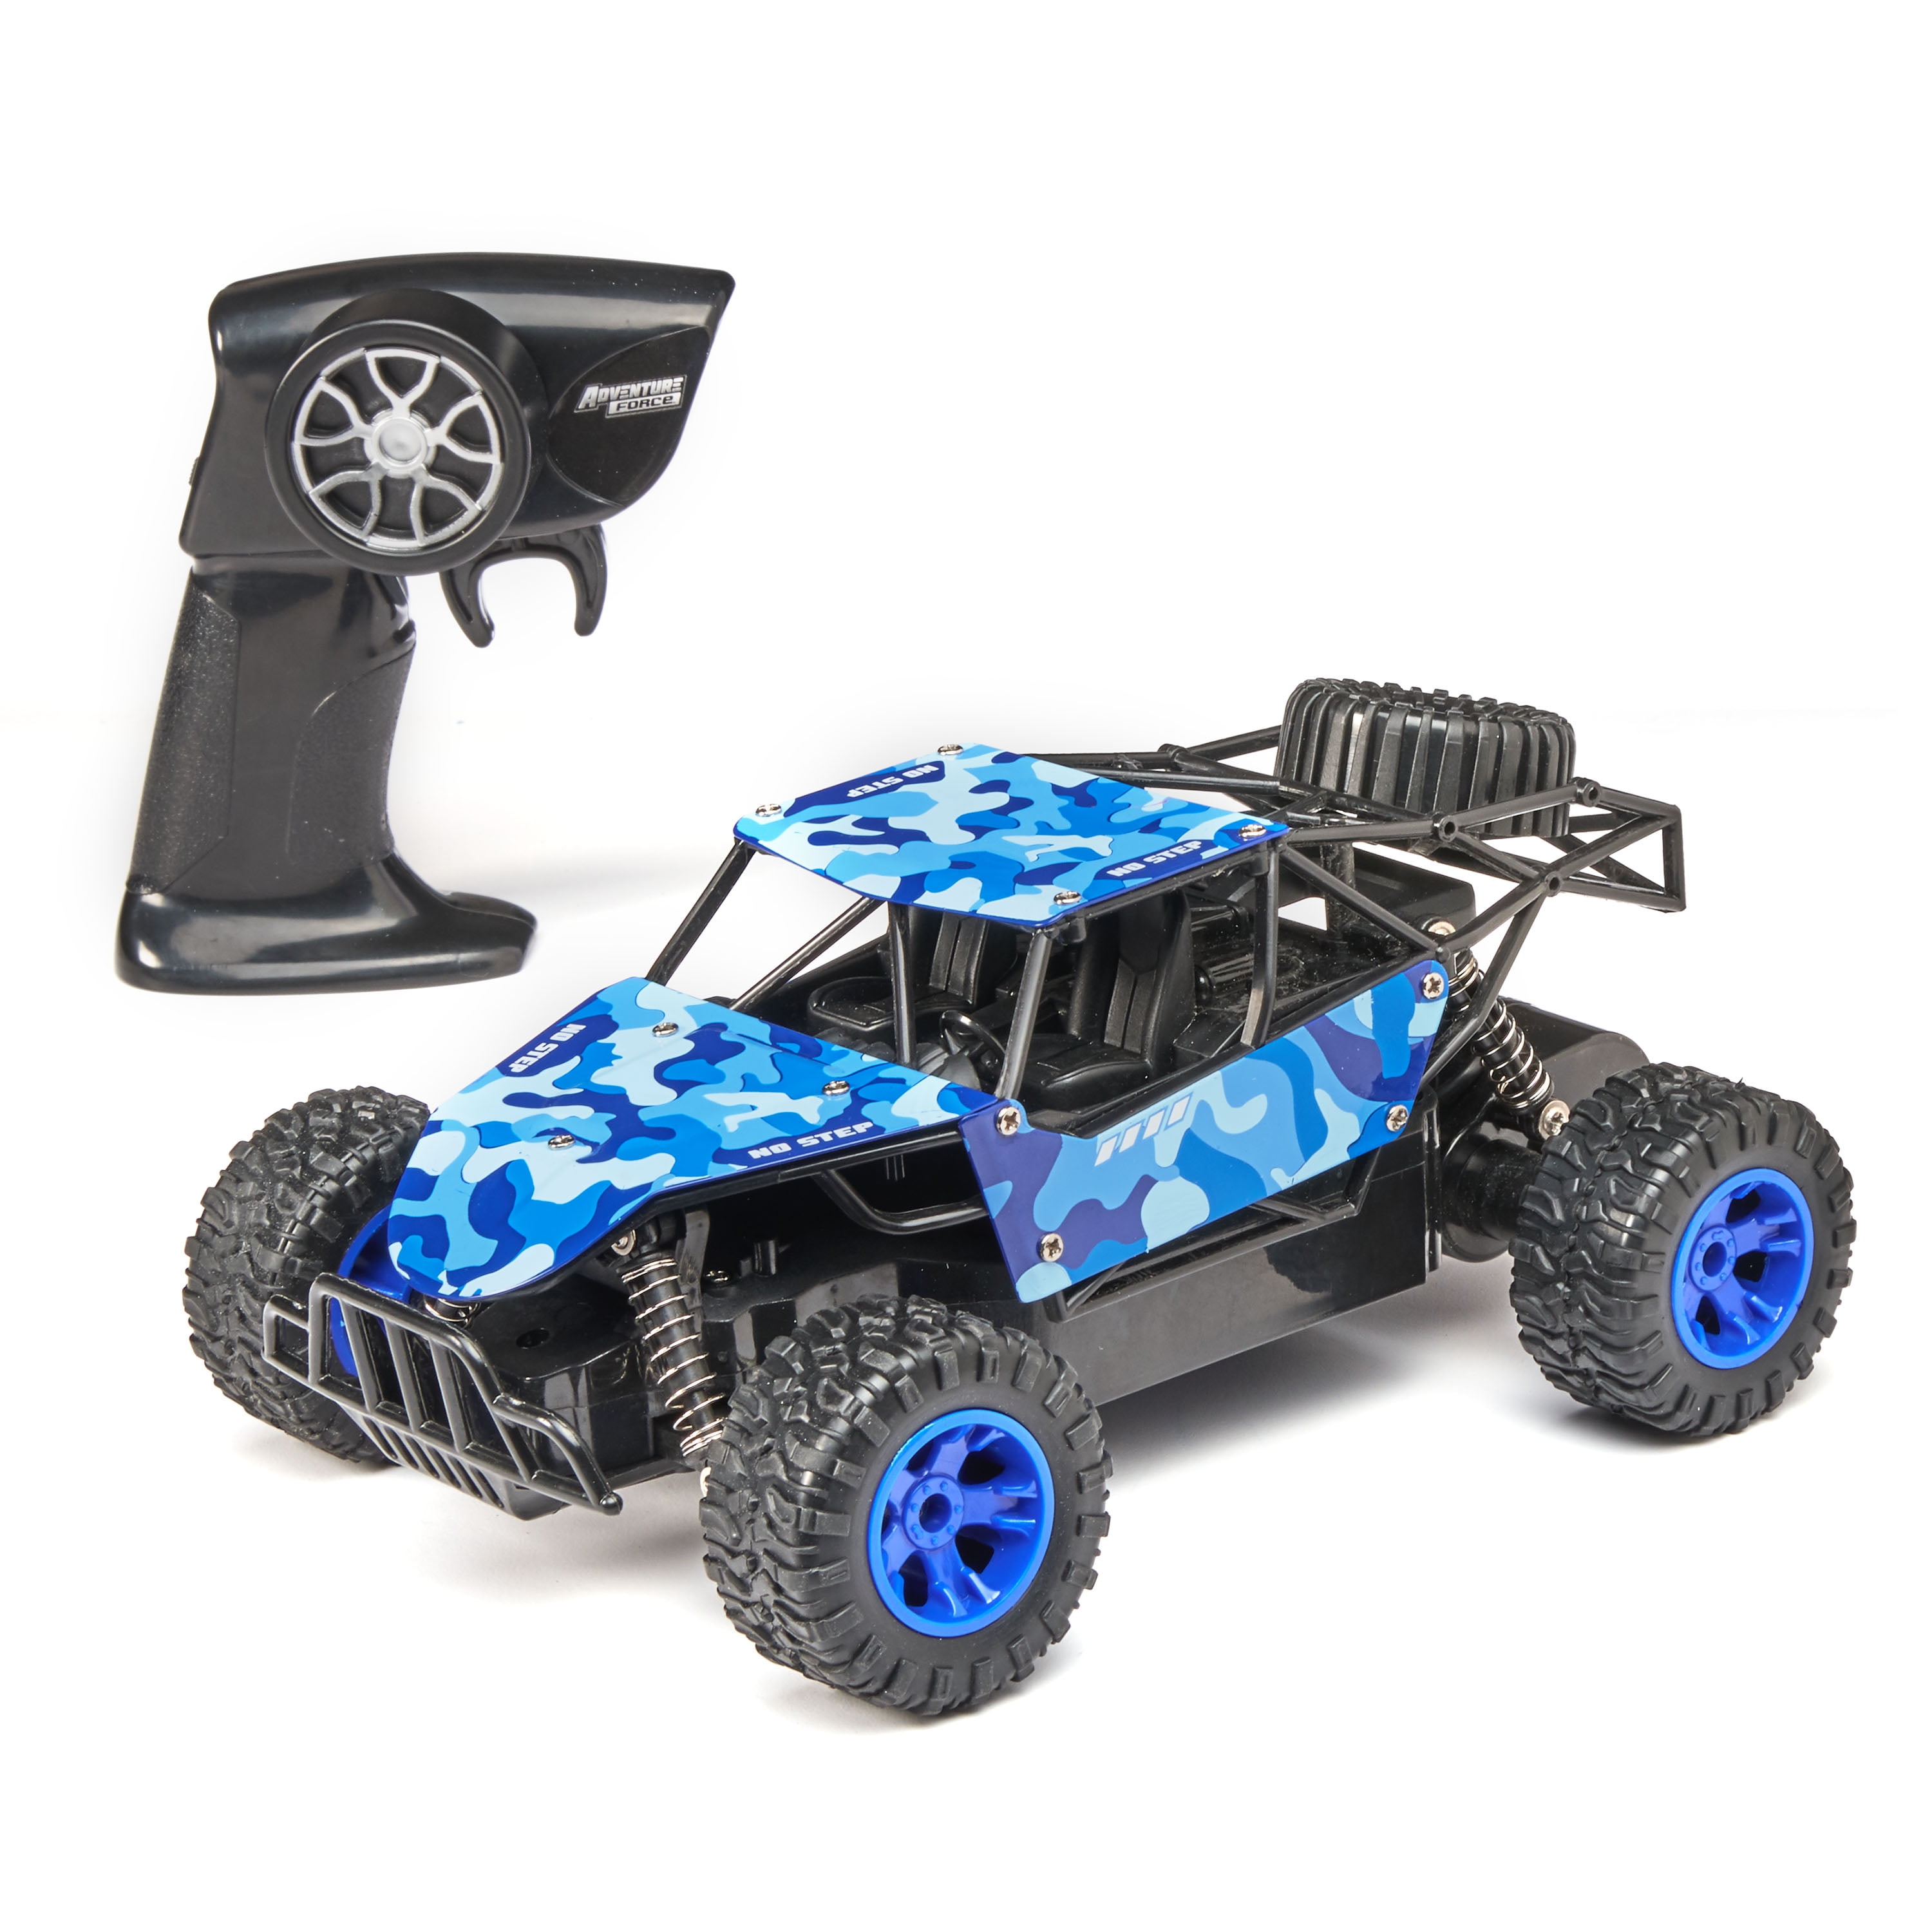 Adventure Force Metal Racer Radio Control Car Body Cage good for SCX24